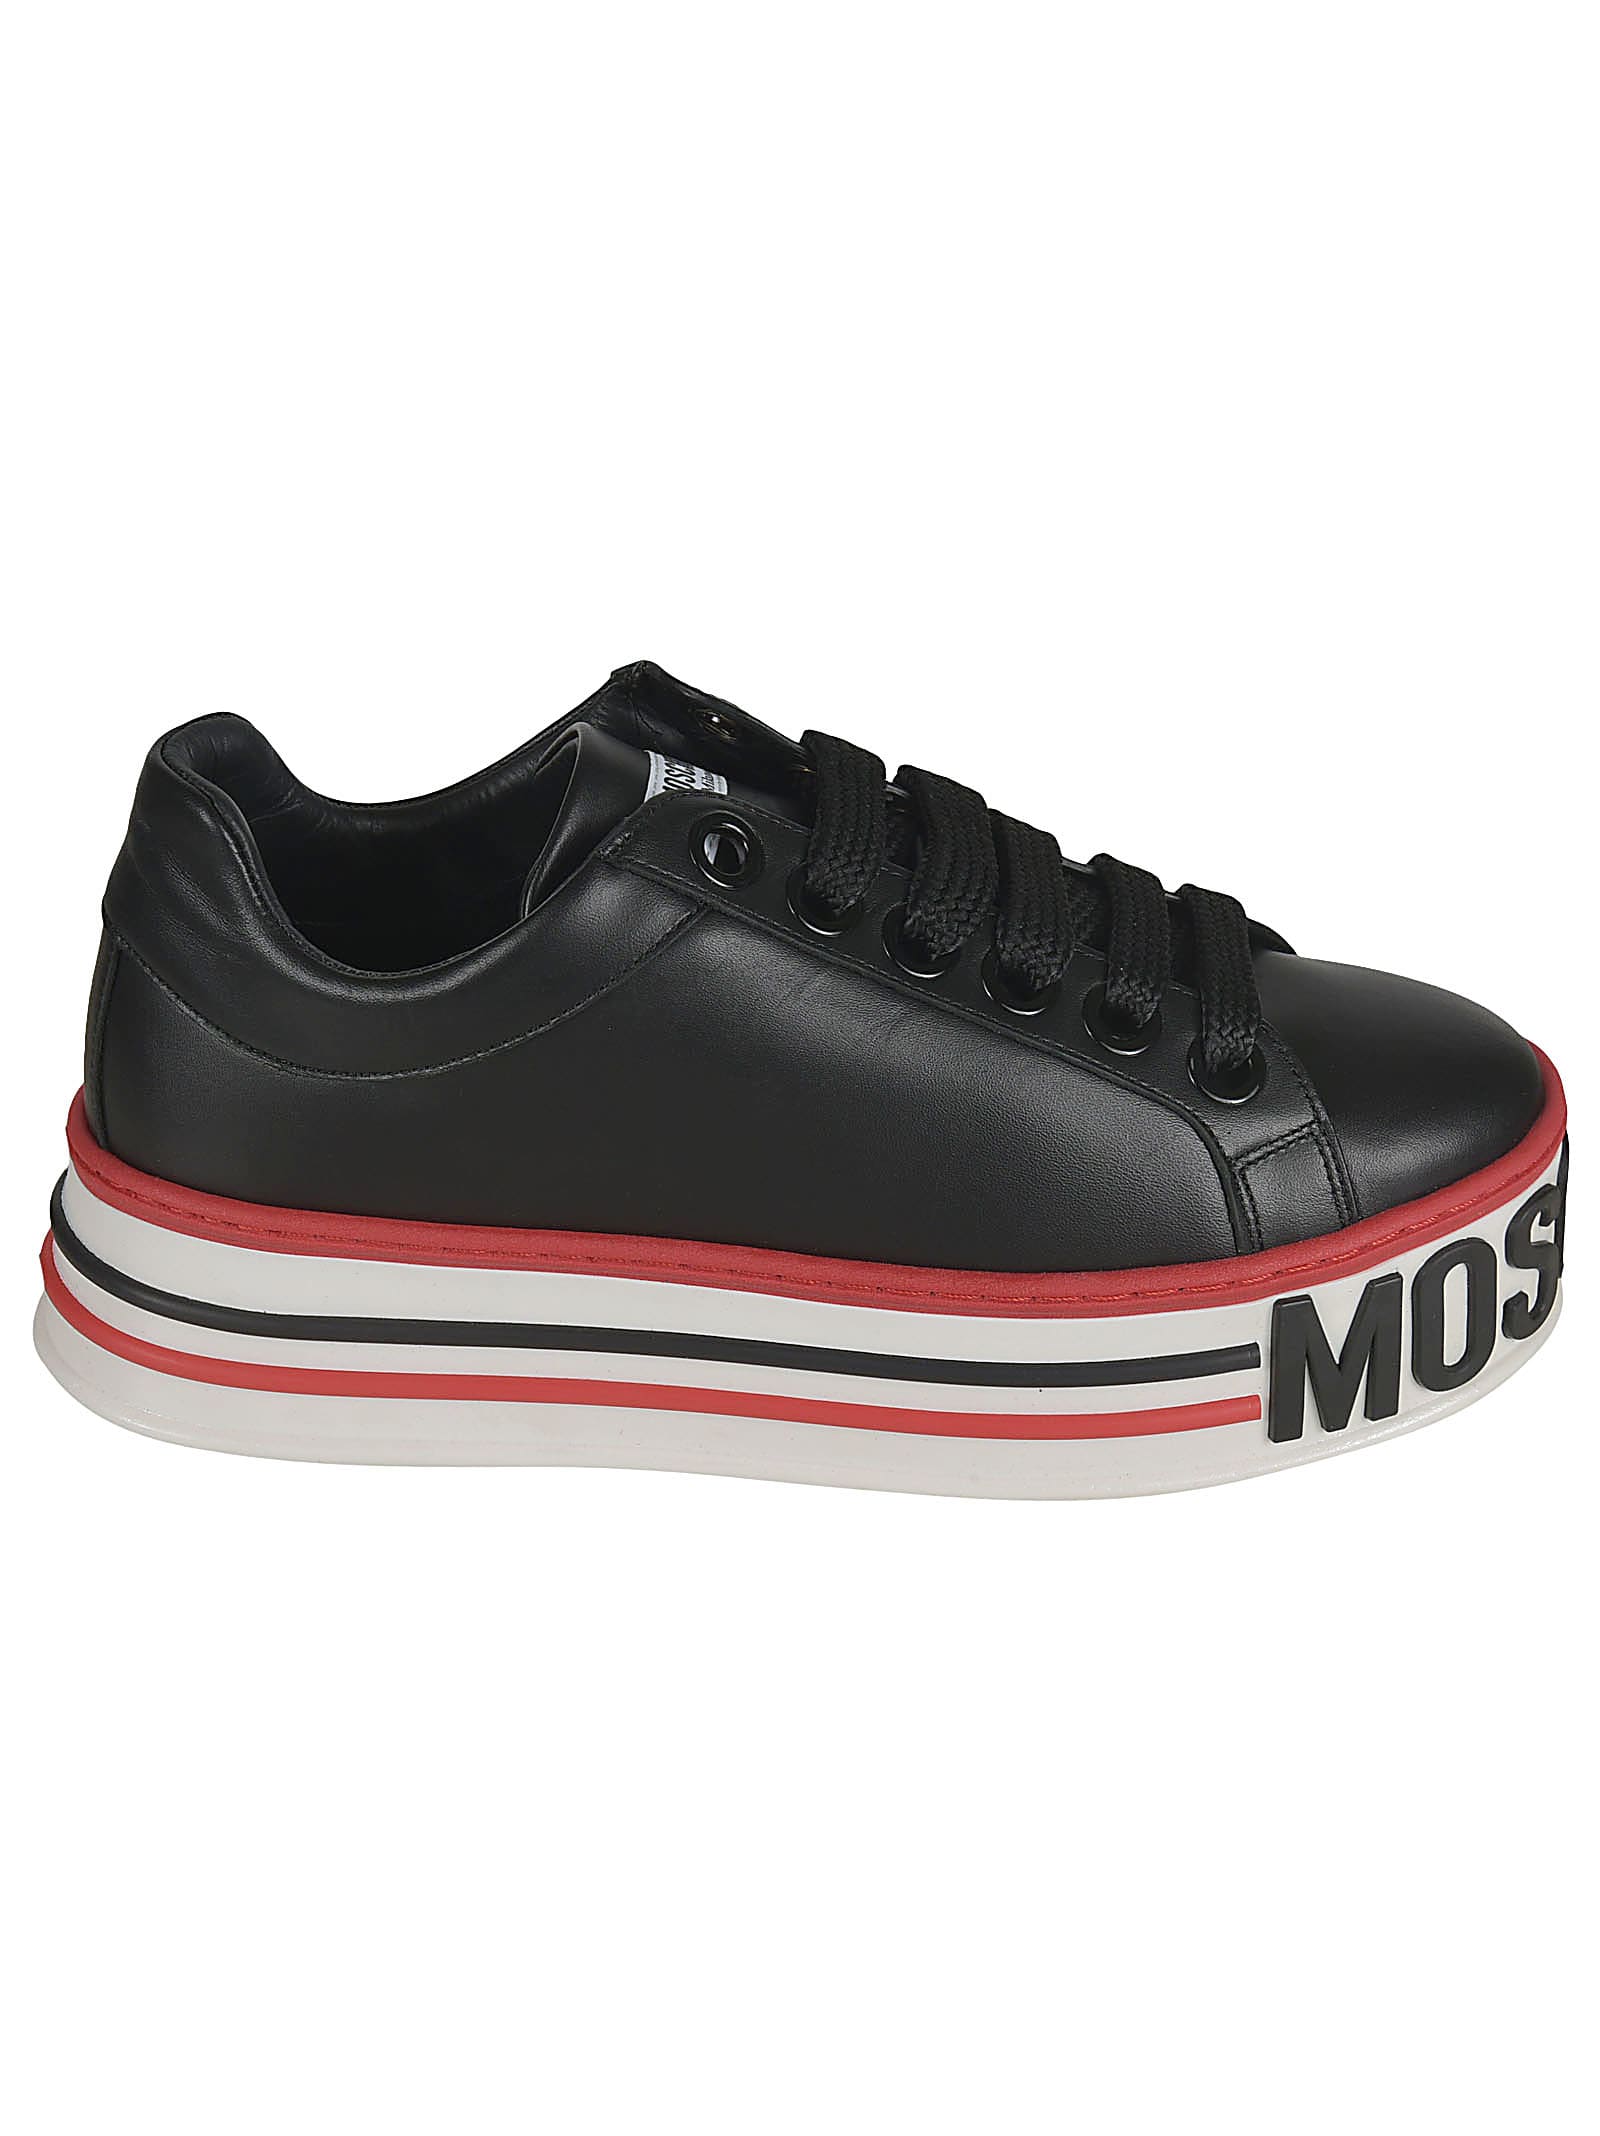 Buy Moschino Embossed Logo Platform Sneakers online, shop Moschino shoes with free shipping